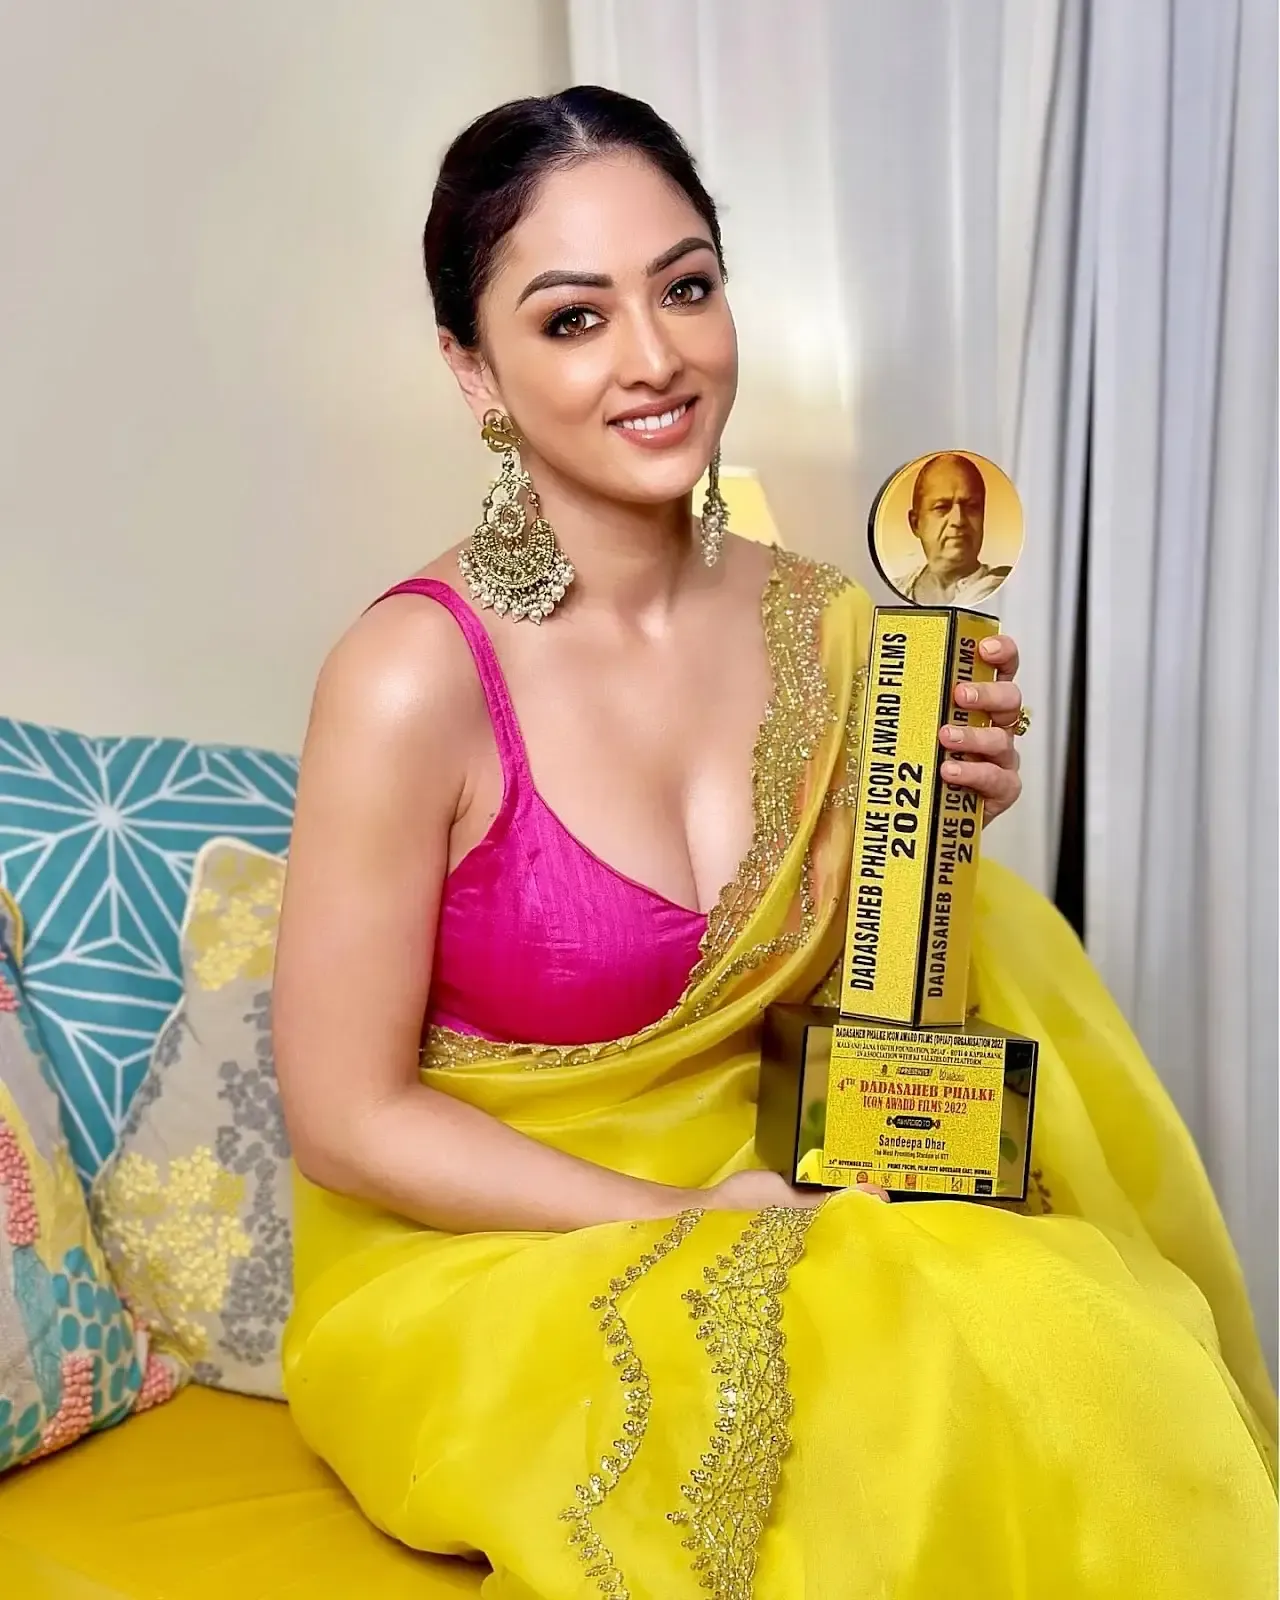 NORTH INDIAN MODEL SANDEEPA DHAR IMAGES IN TRADITIONAL YELLOW SAREE 4